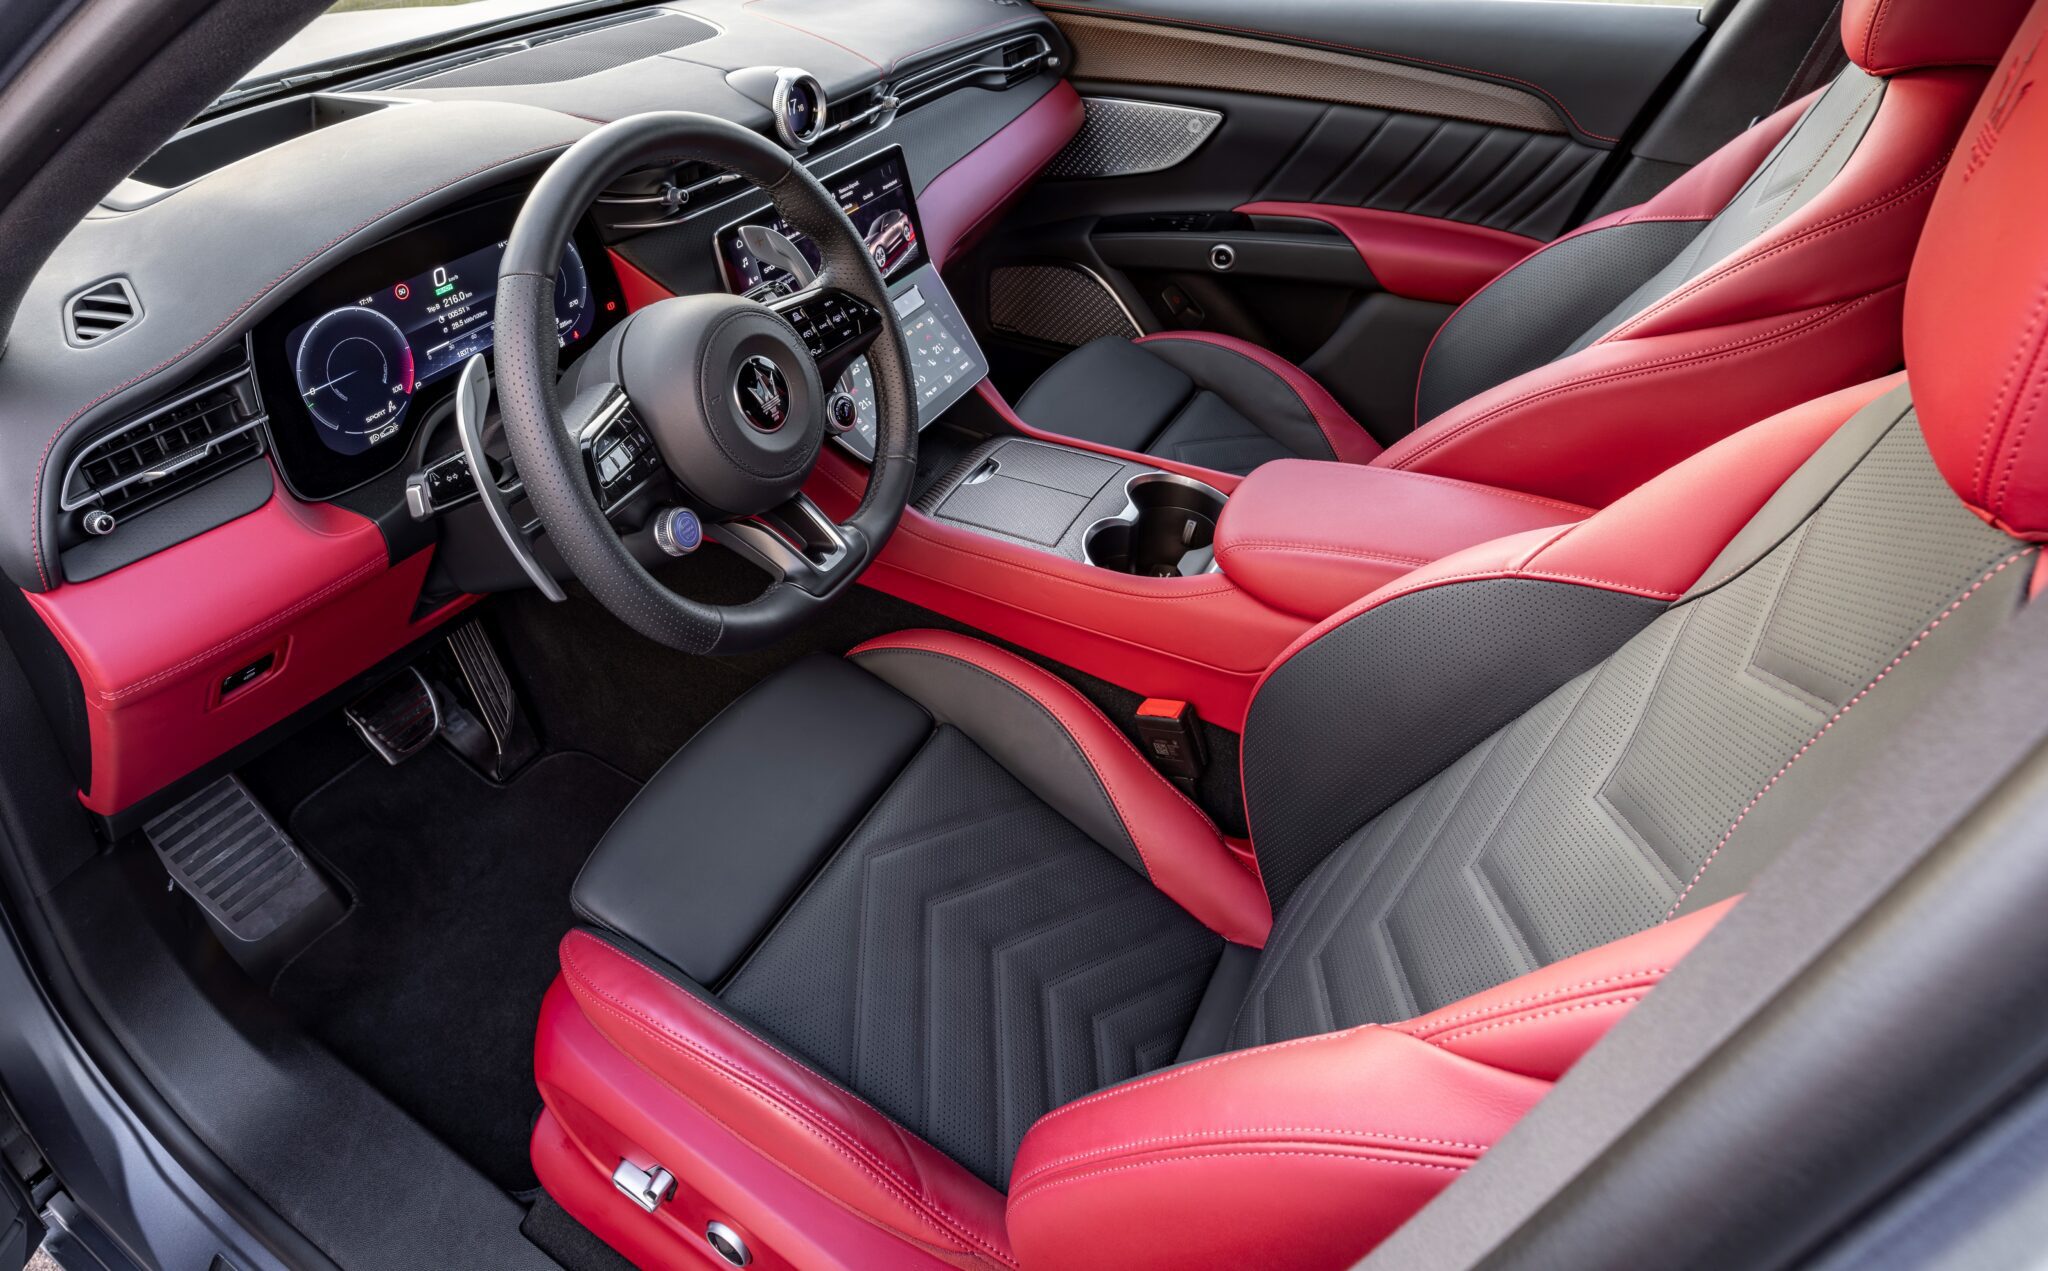 An image of an SUV's interior.